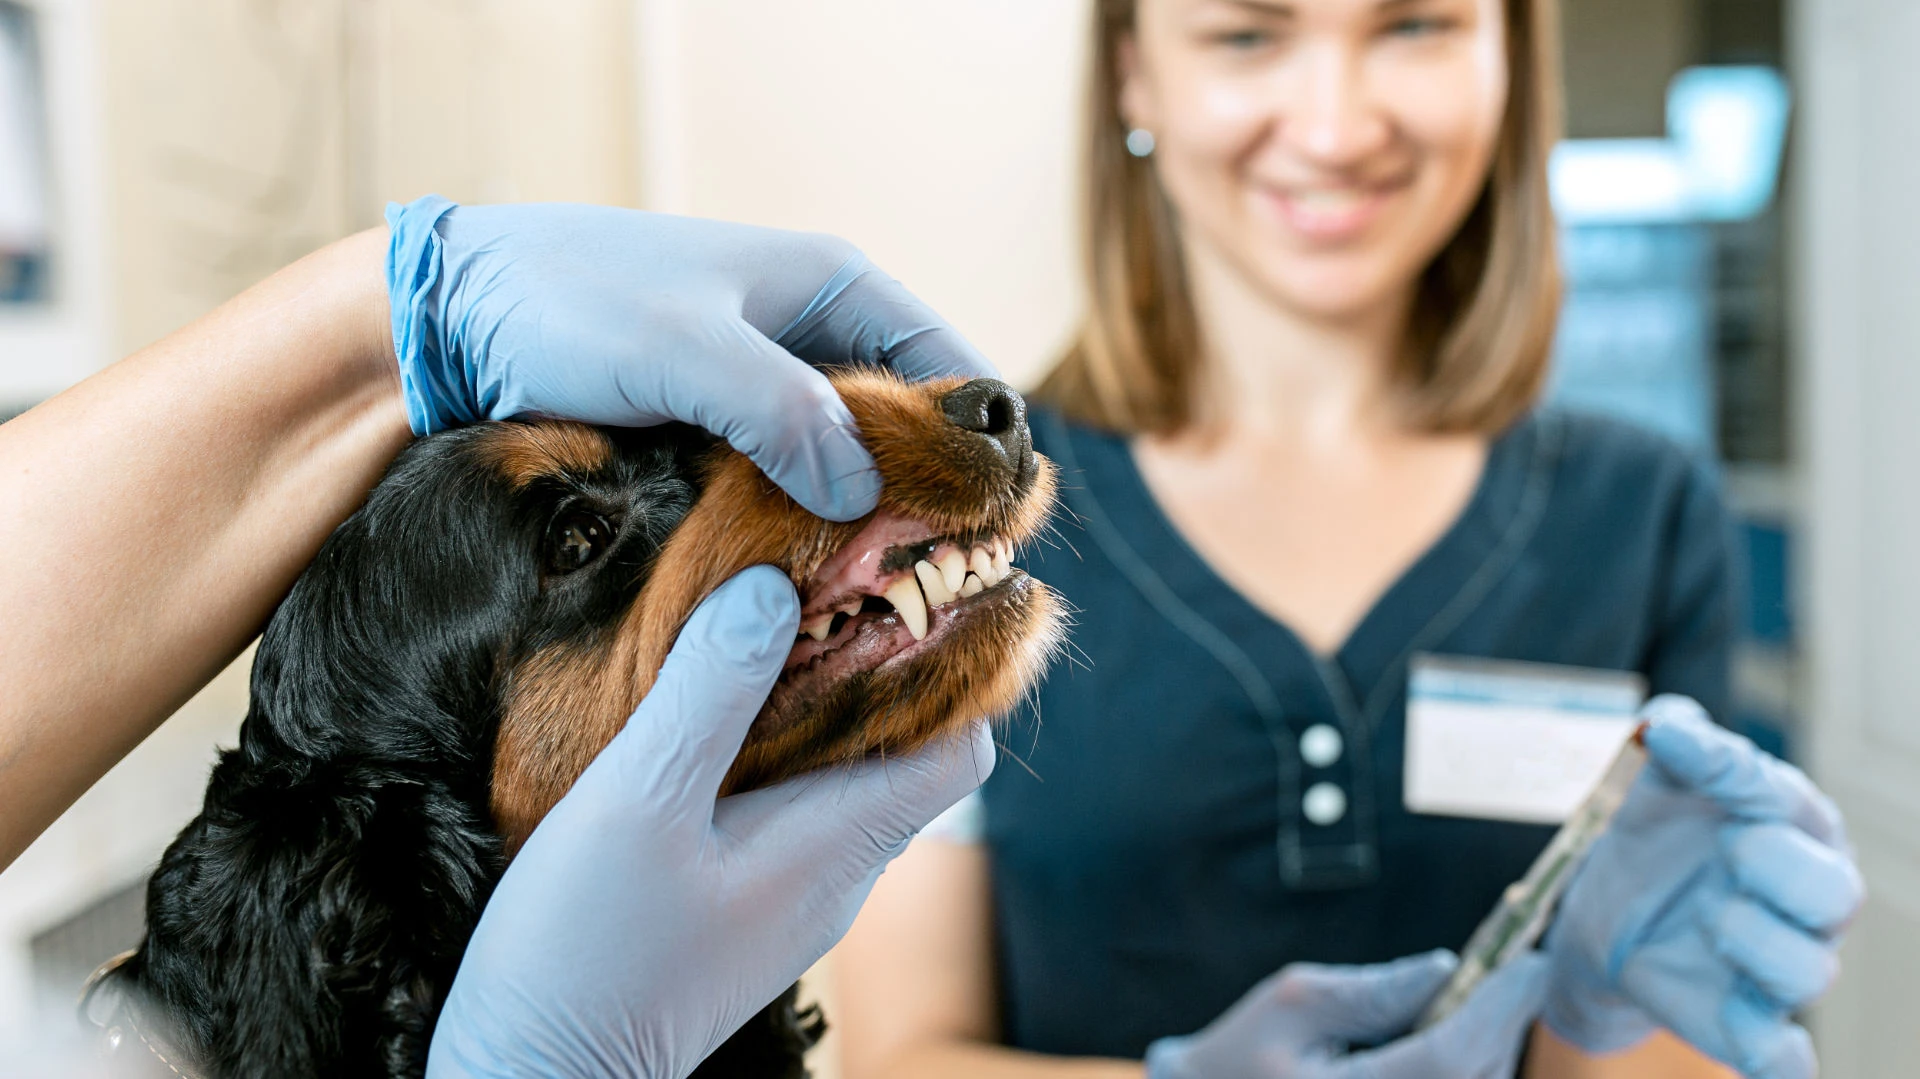 A Vet inspecting a dogs teeth with a nurse assisting in the background.